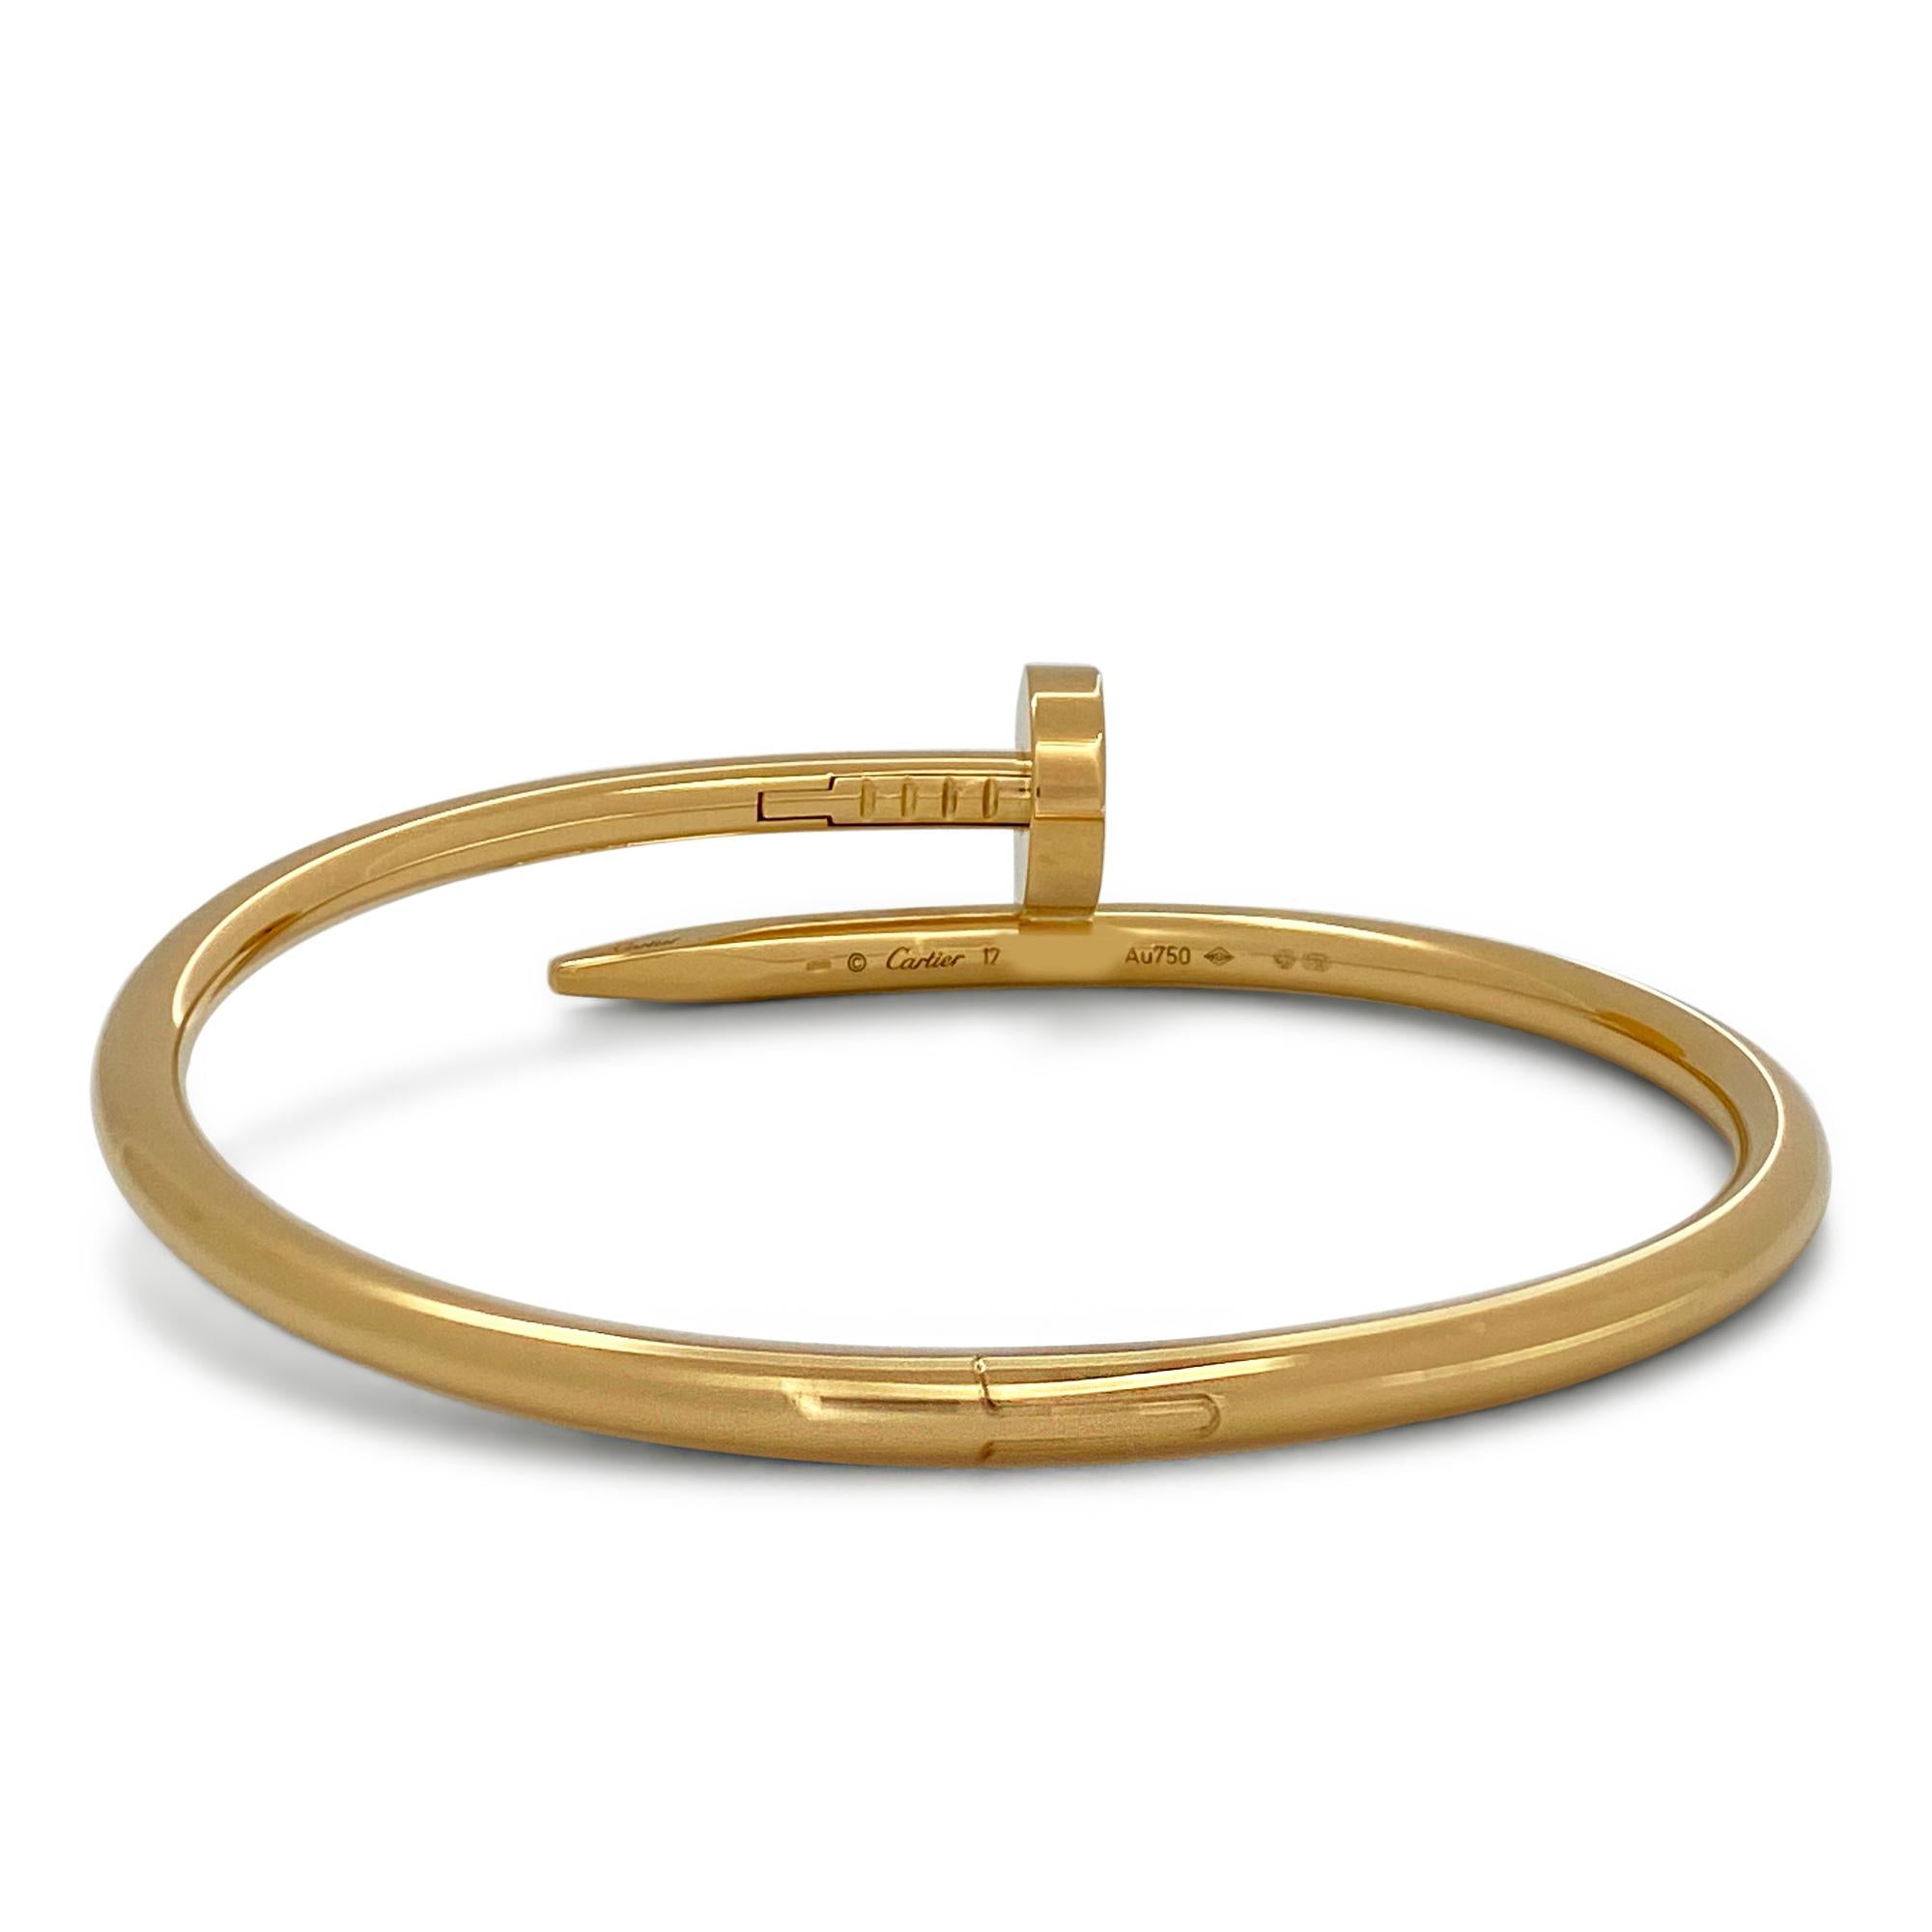 Designed as a 'just a nail', this authentic Cartier 'Juste un Clou' bracelet is modern, transcending the every day, yet bold. The nail bracelet is an innovative twist on a familiar and ordinary object. Signed Cartier, 17, Au750. Bracelet is 3.5mm in